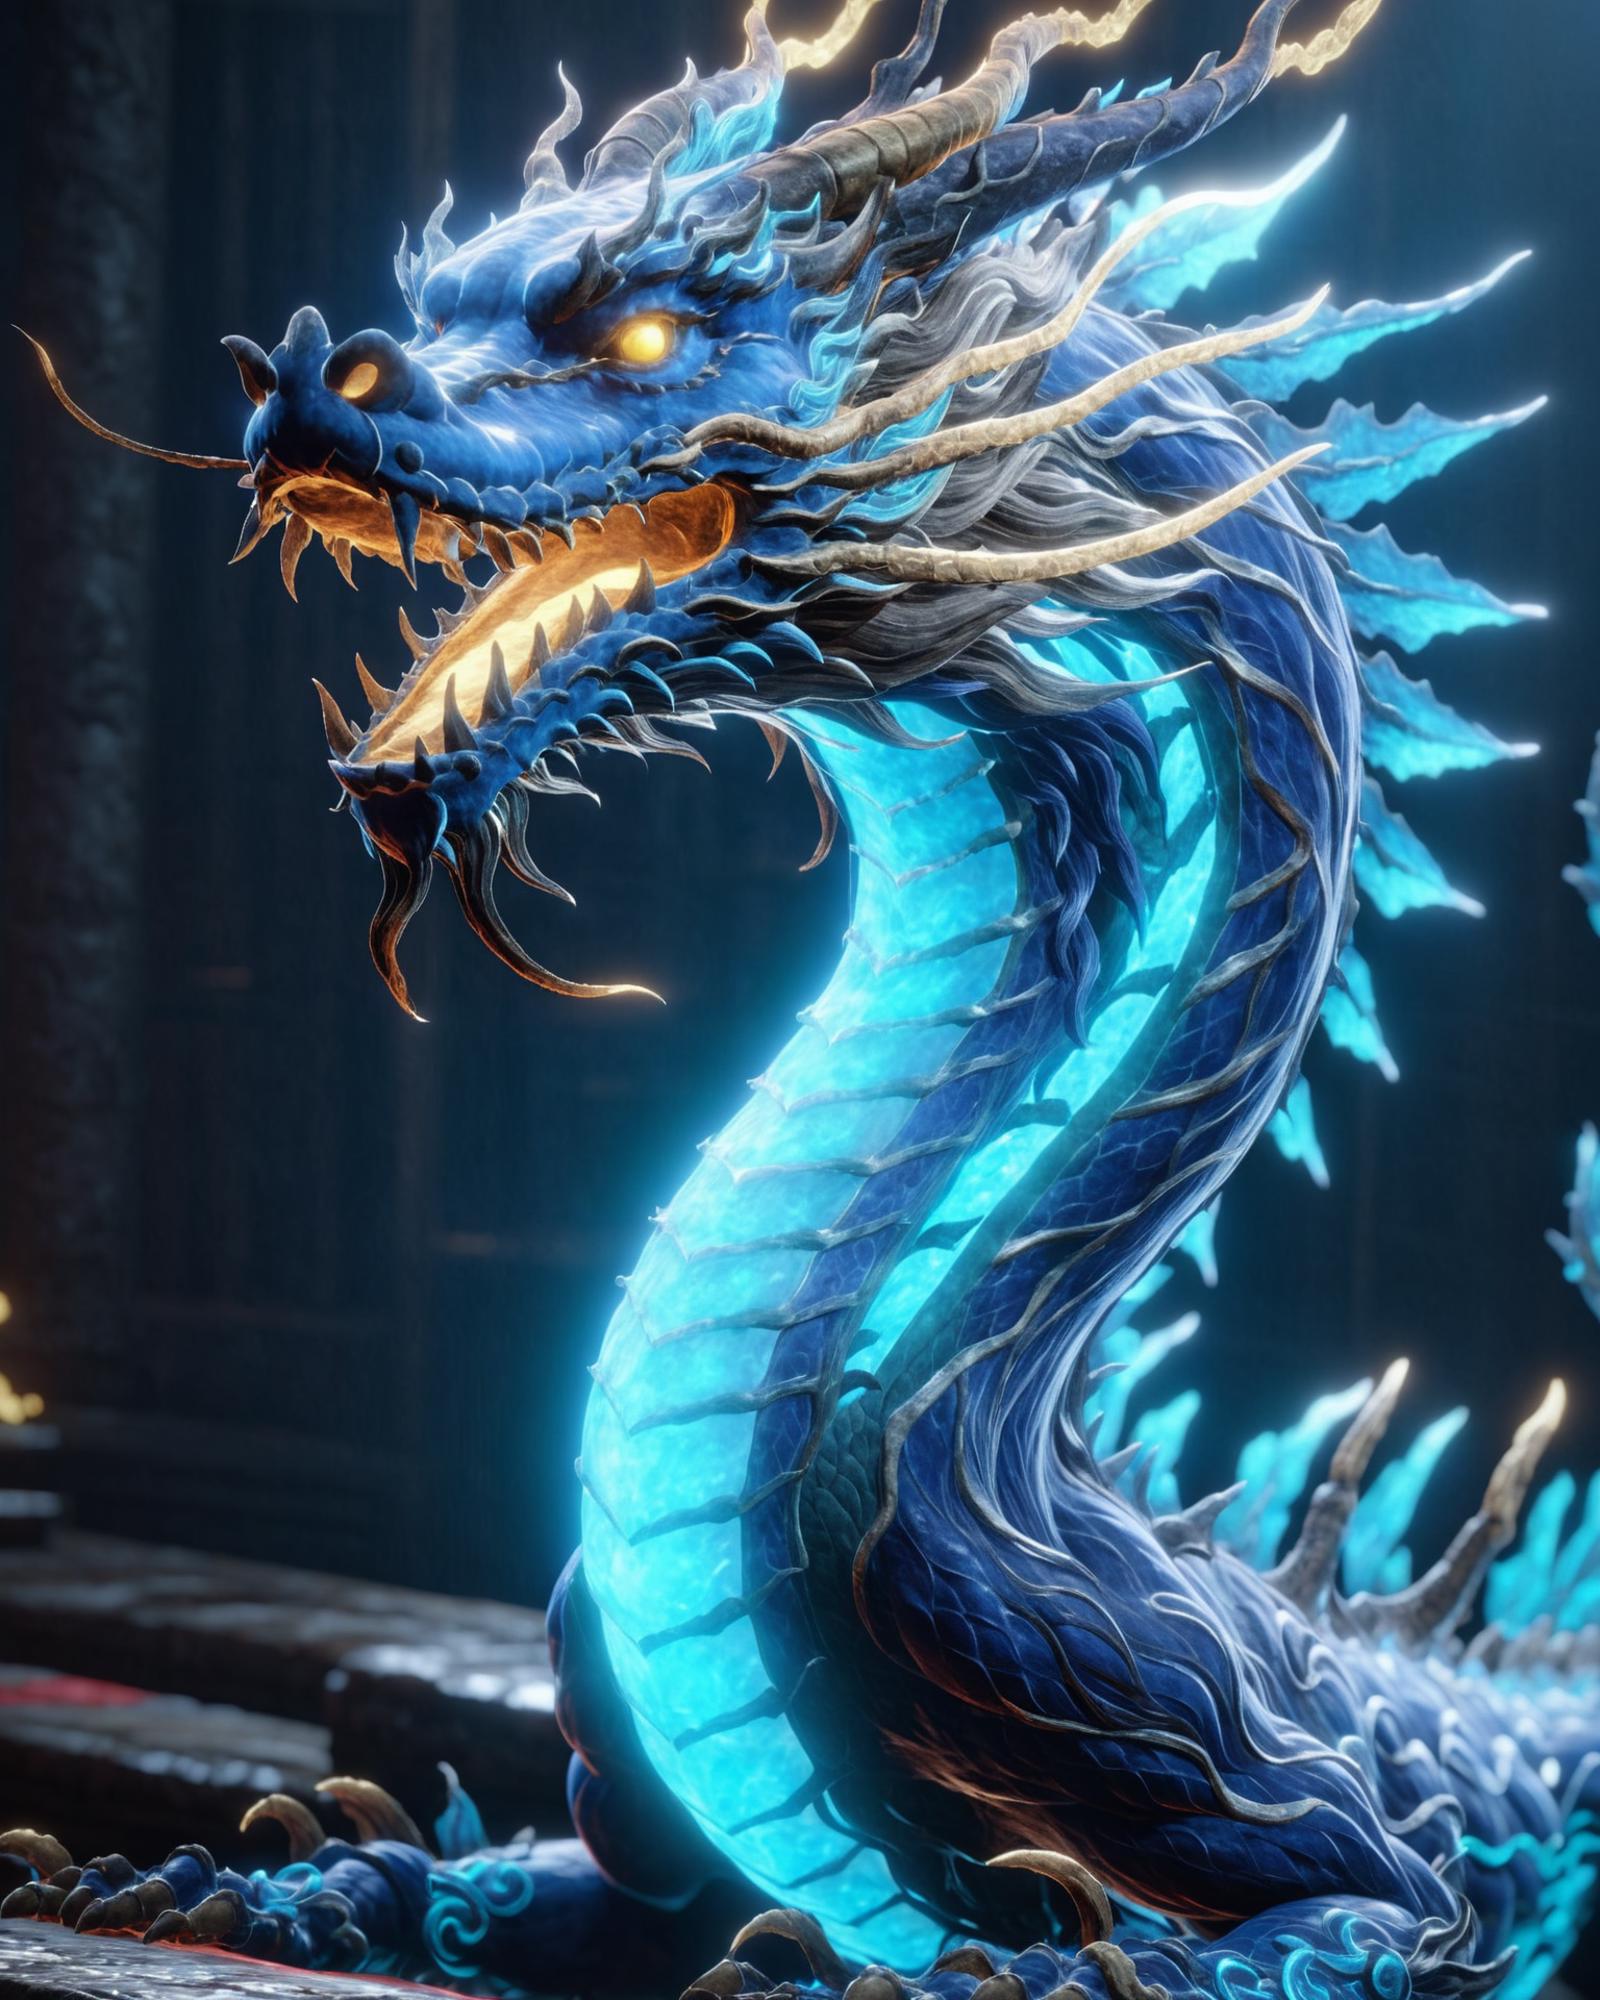 Blue and white dragon with glowing eyes and a ferocious expression.